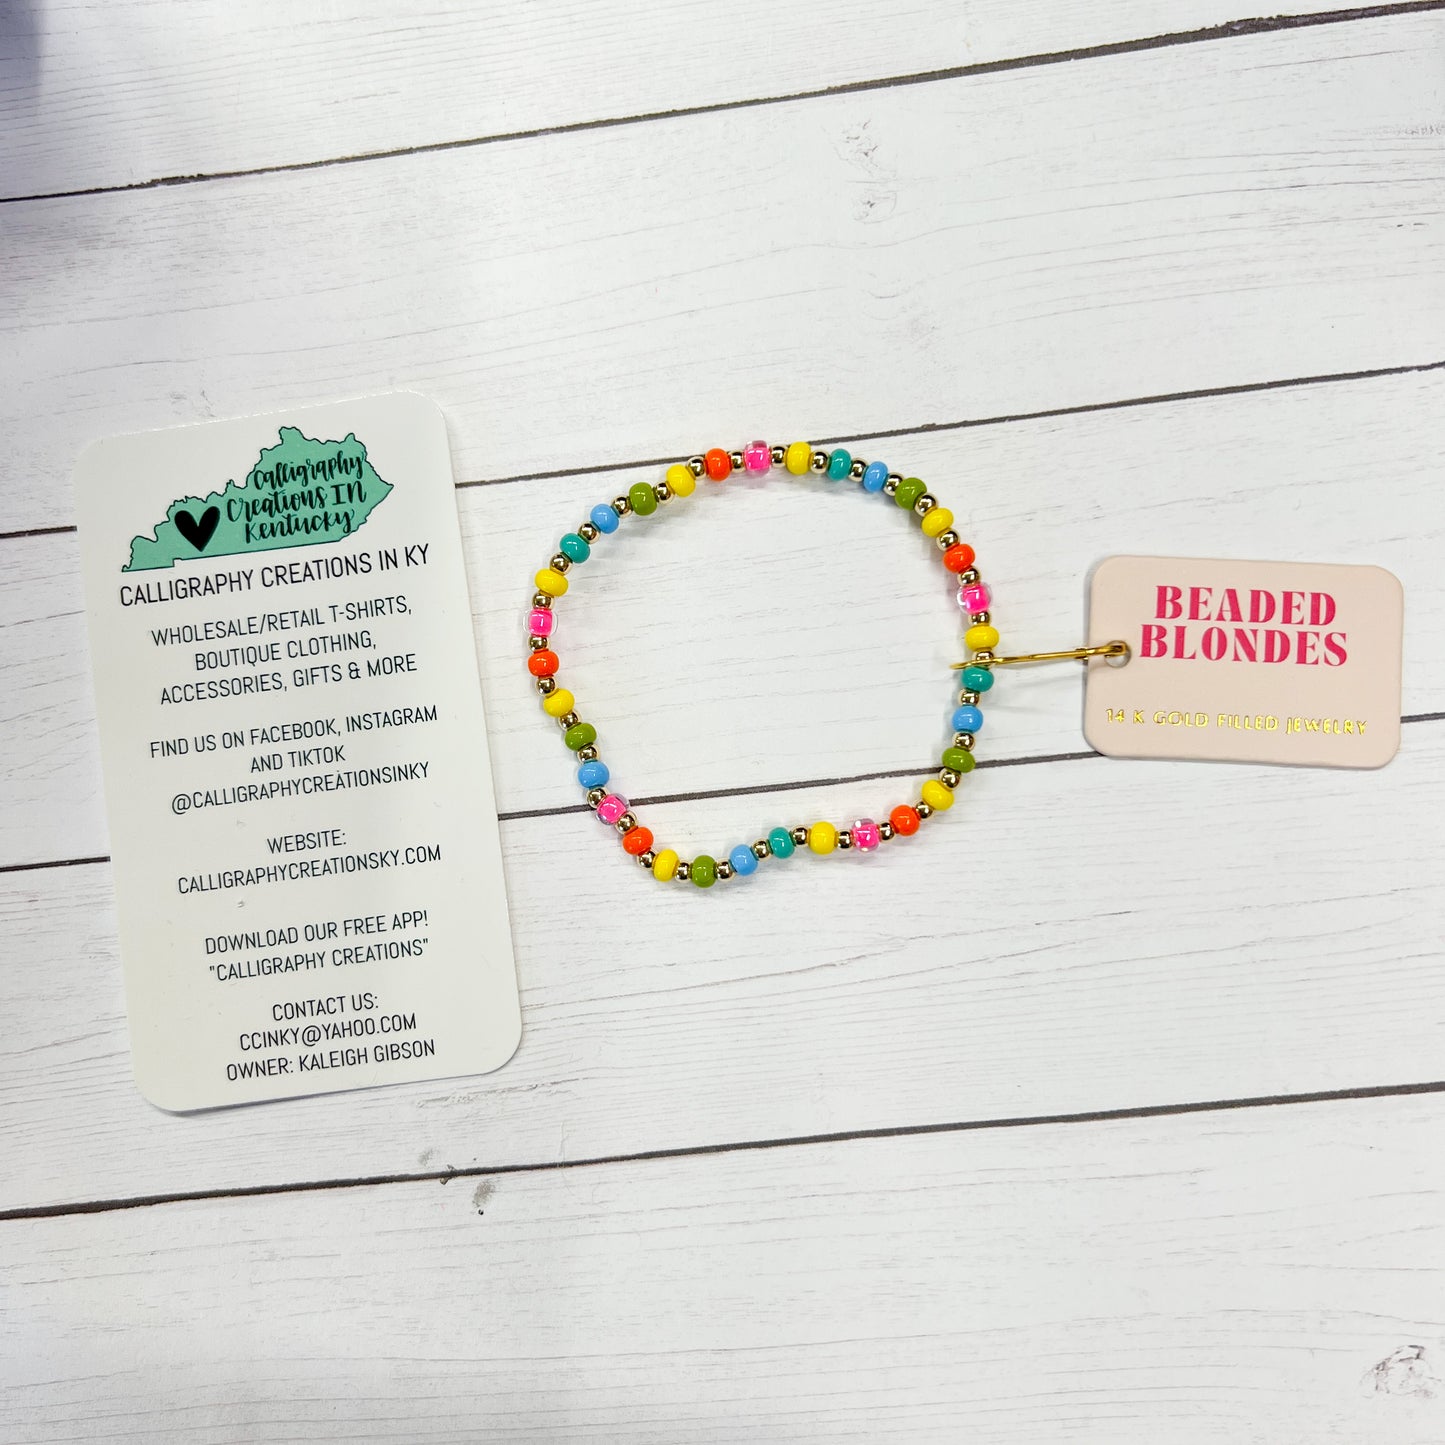 Life’s A Party Beaded Blondes Bracelet